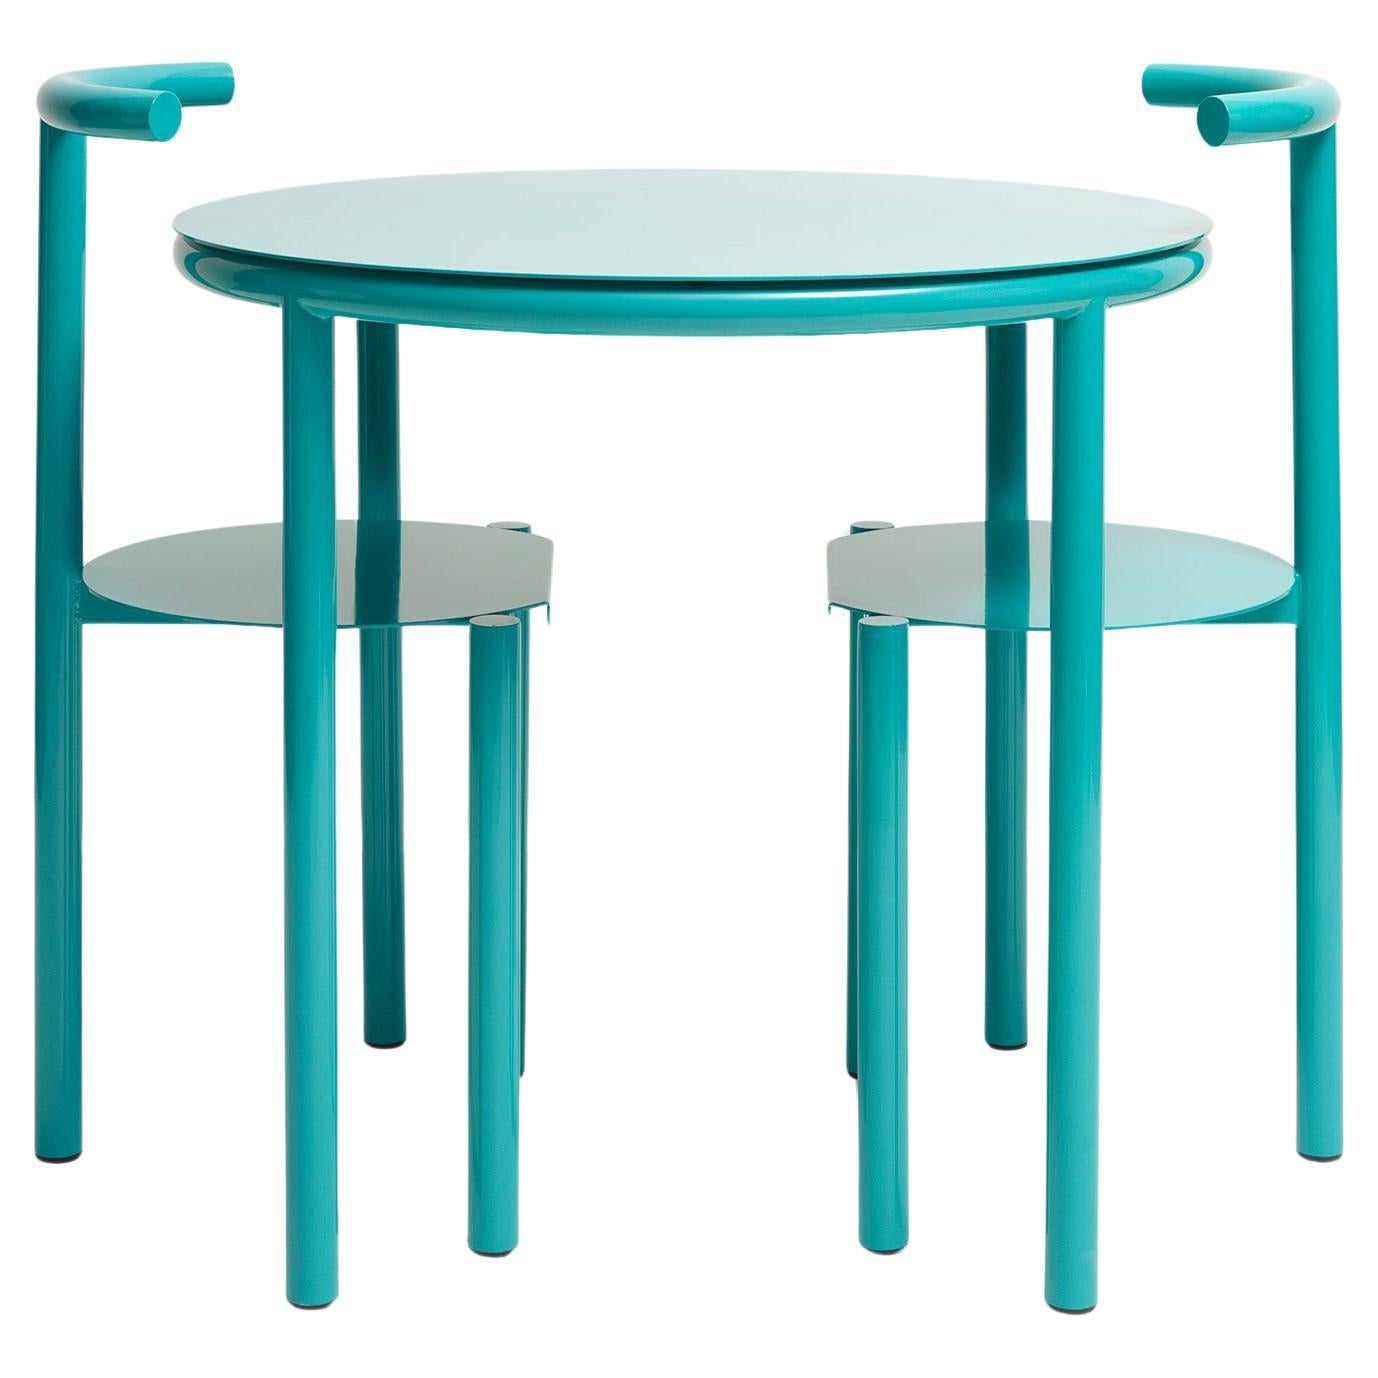 Ring Table with 2 chairs- Minimal Coloured Tubular Metal Dinning / Cafe Table For Sale